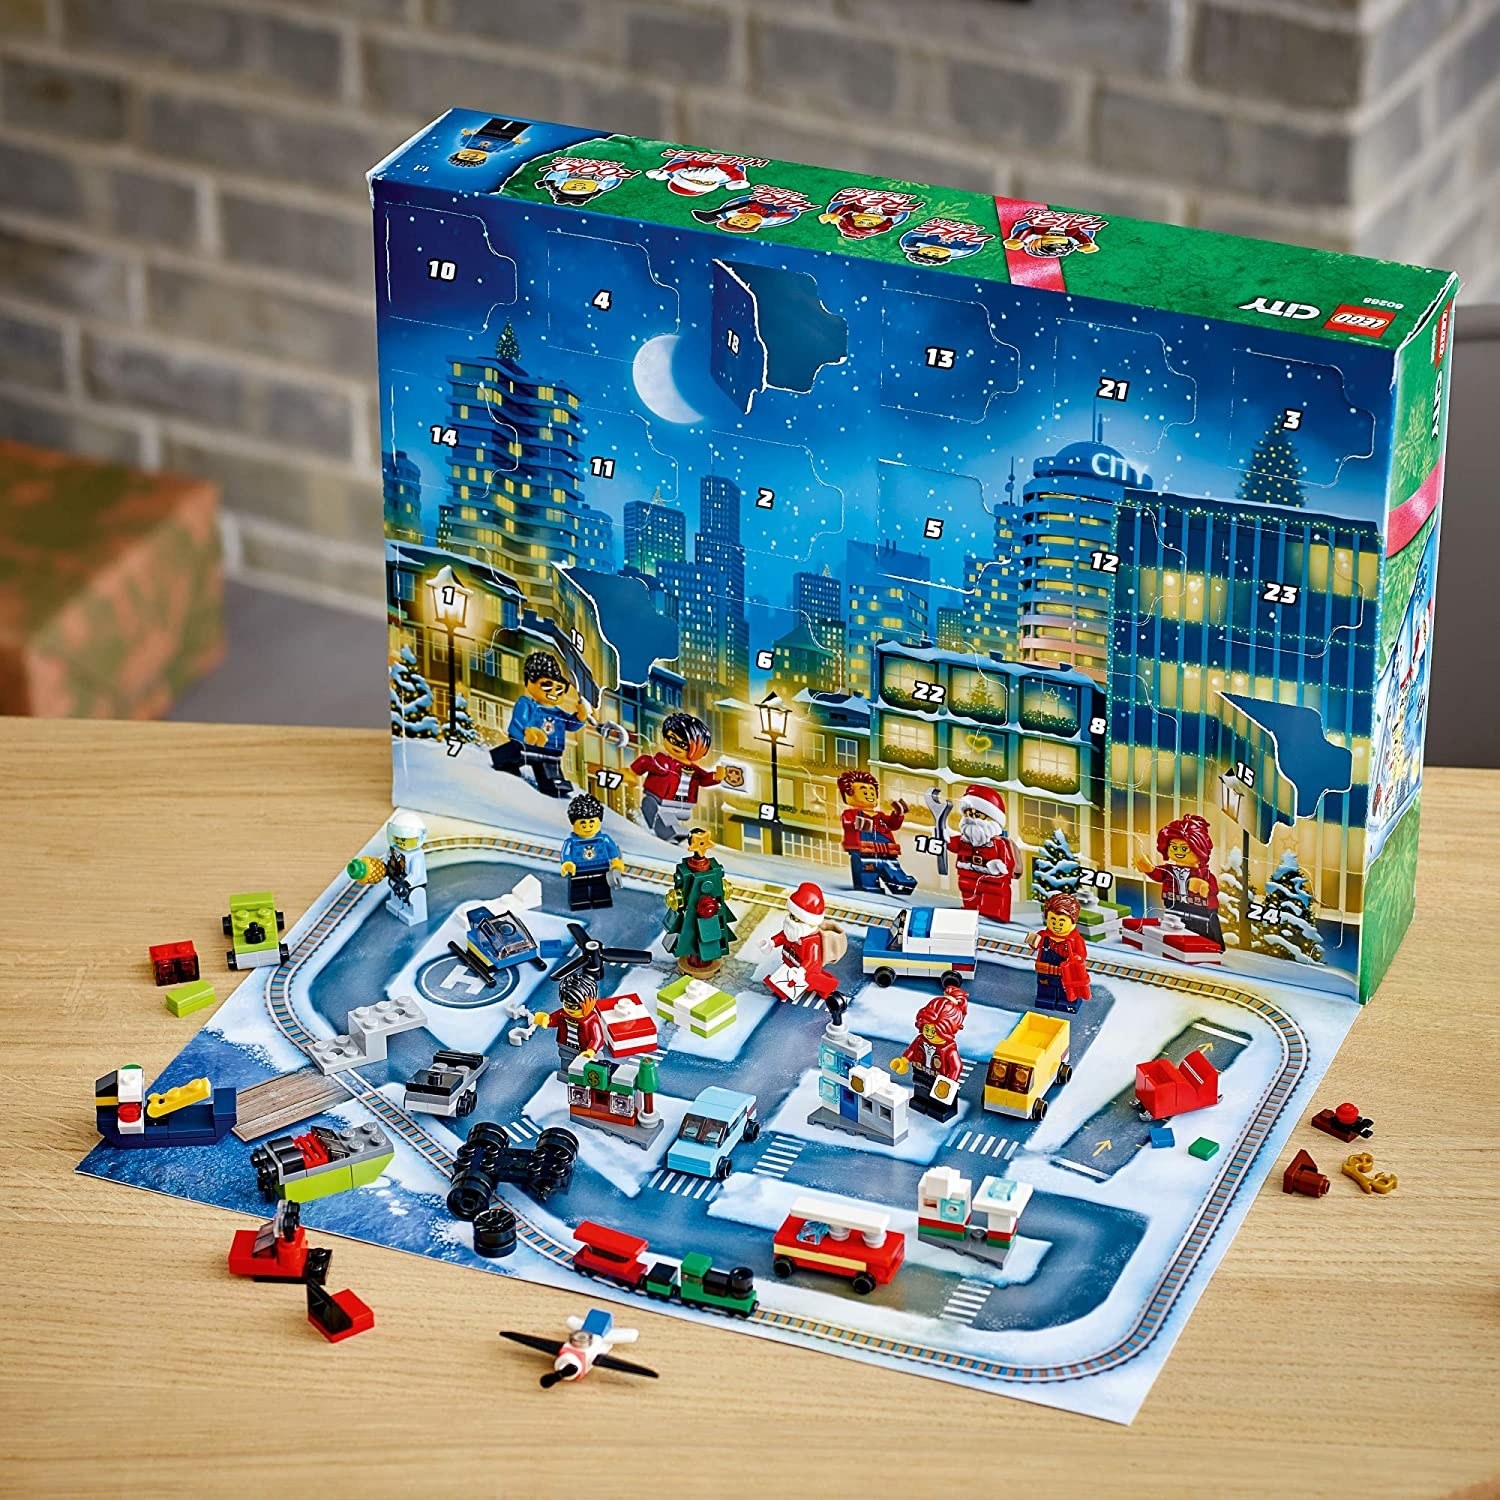 the advent calendar opened up to reveal a street-like platform for the toys to sit on